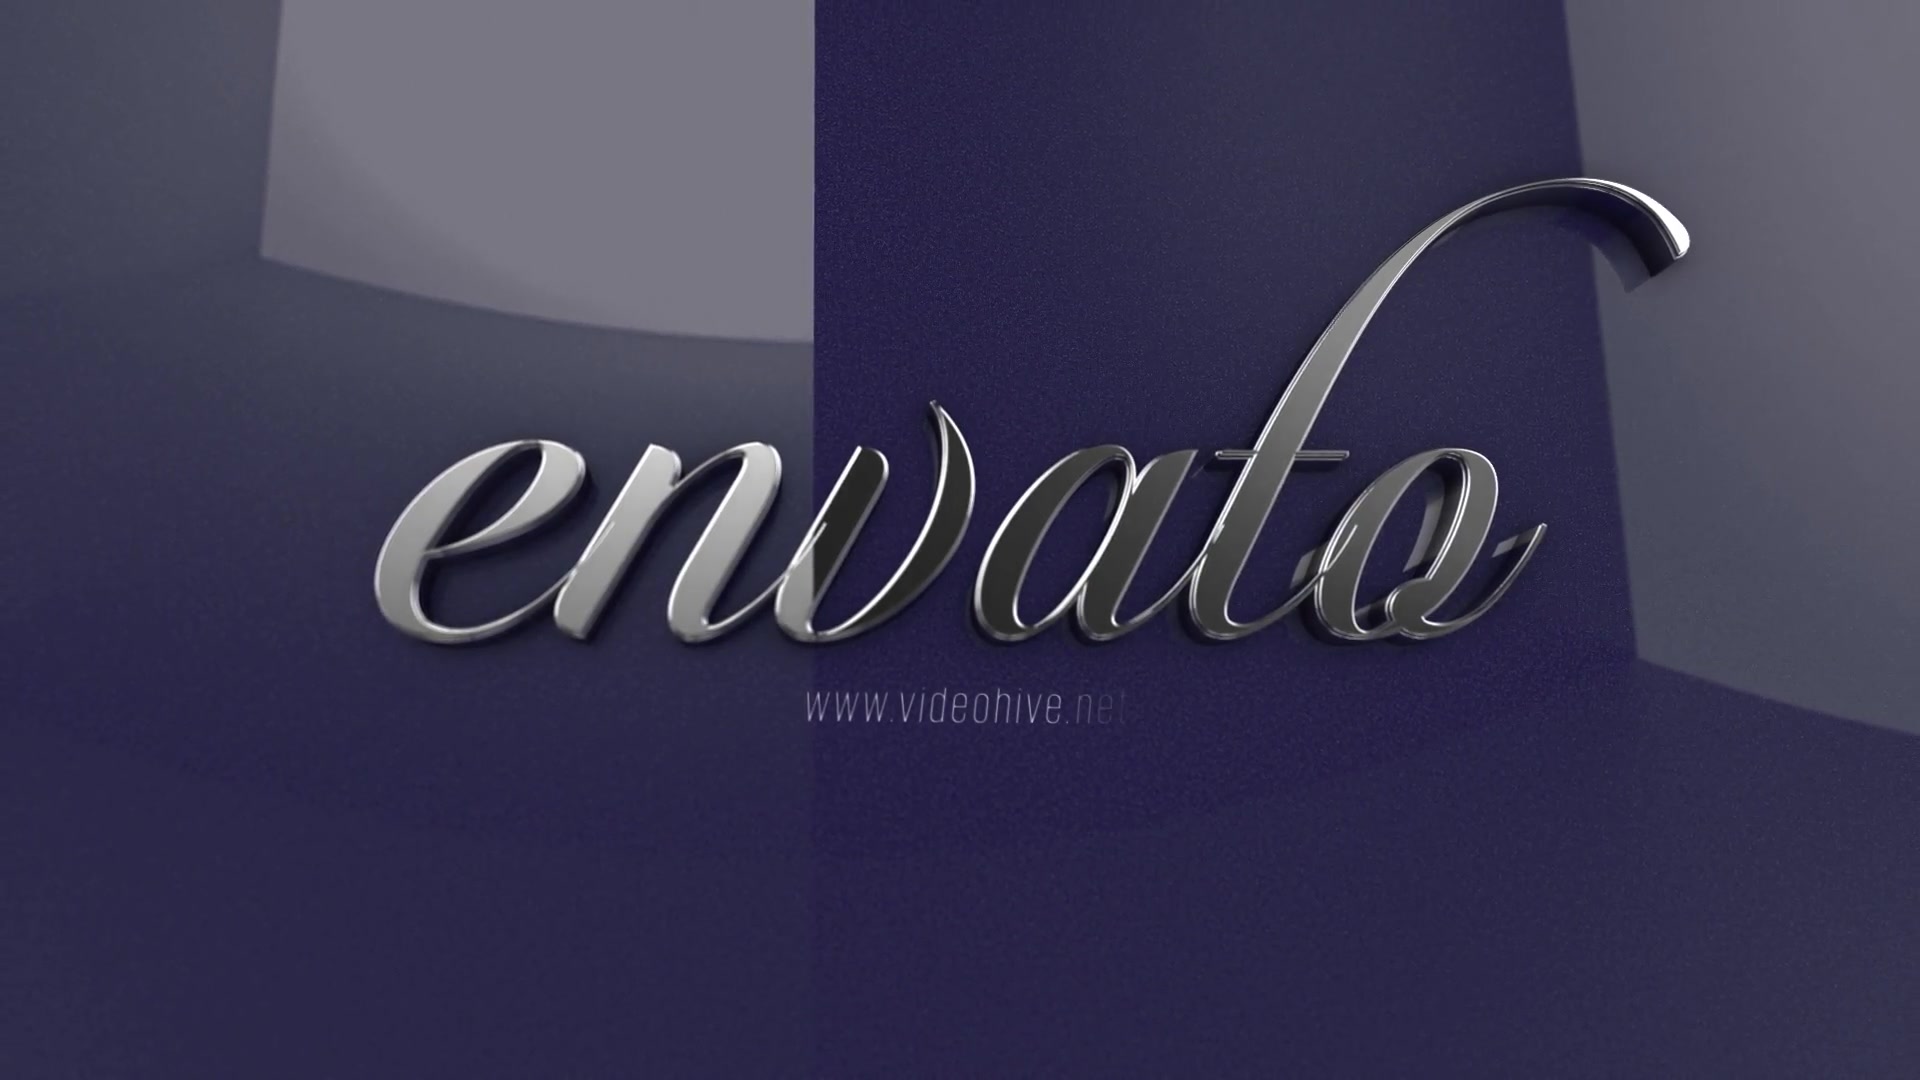 Logo Reveal - Download Videohive 19001762